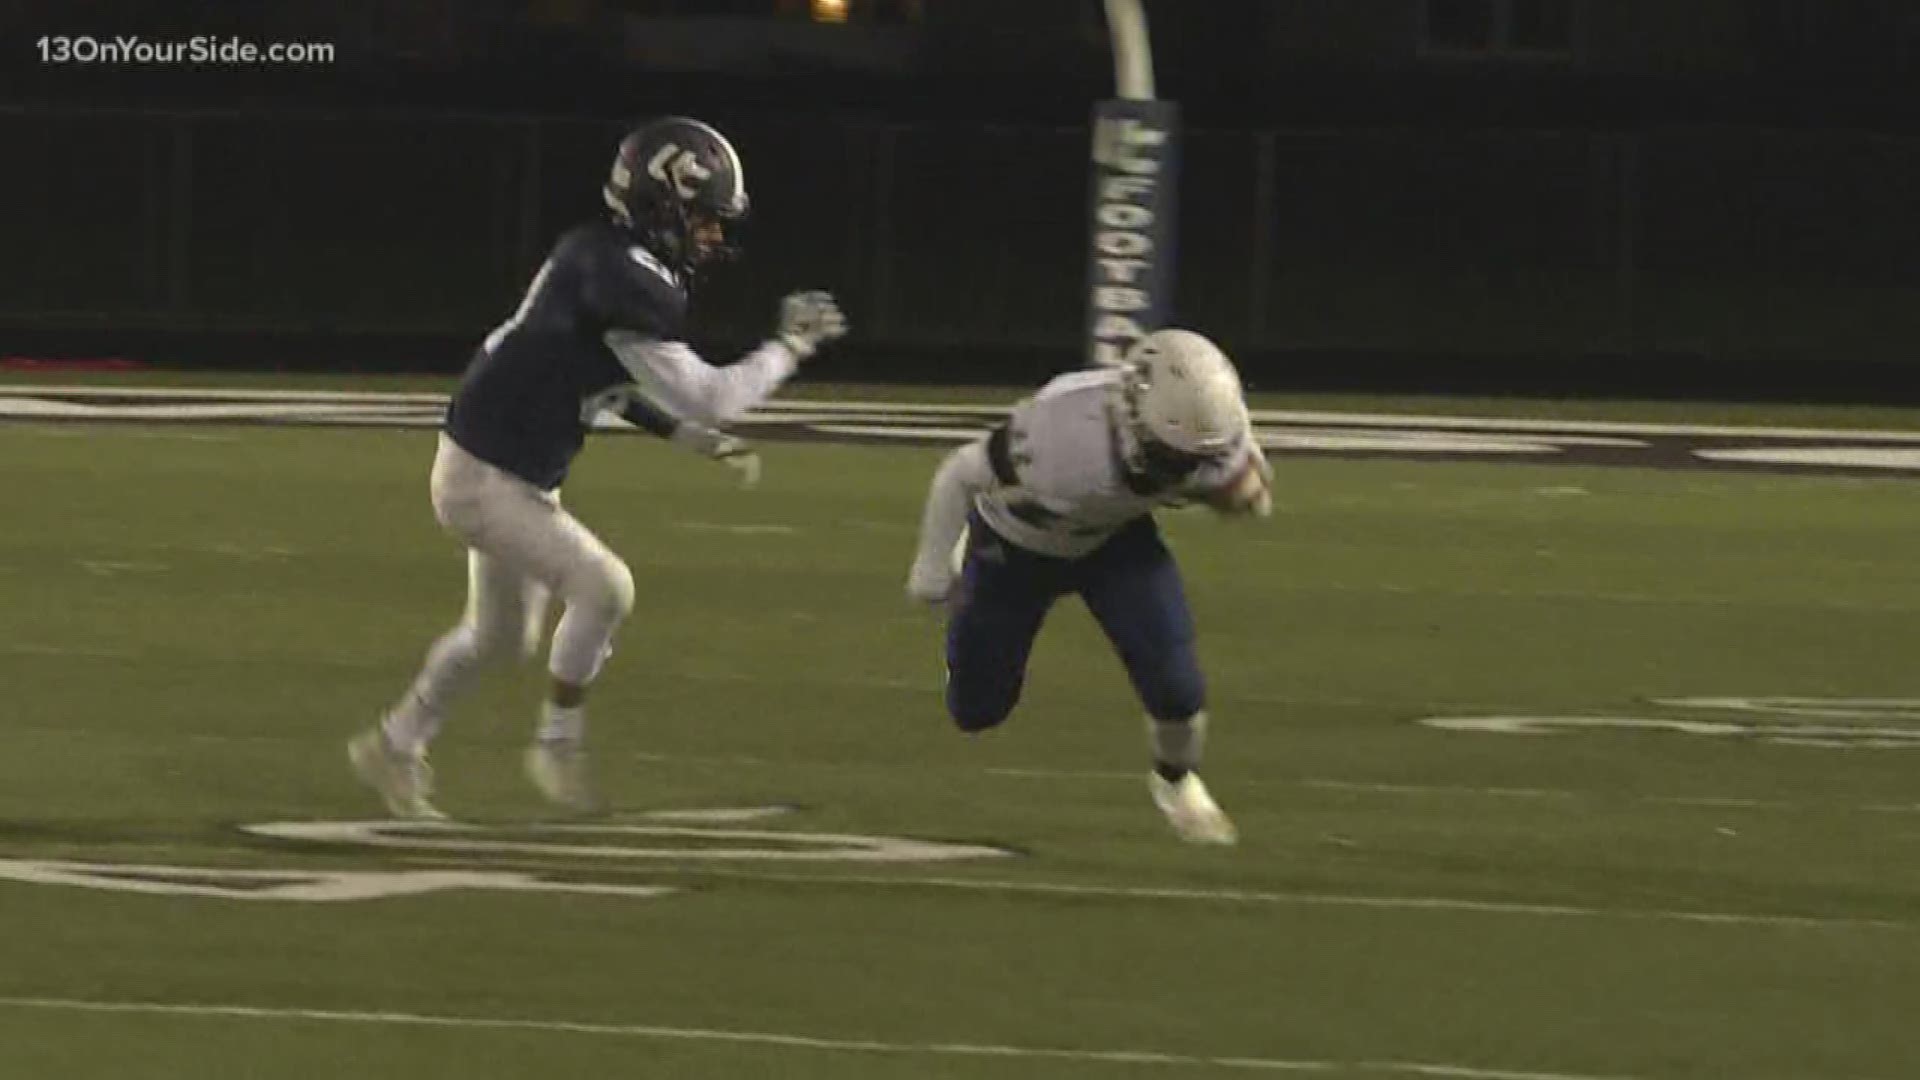 Unity Christian hosted Otsego Friday, Nov. 1 in the first round of playoffs.